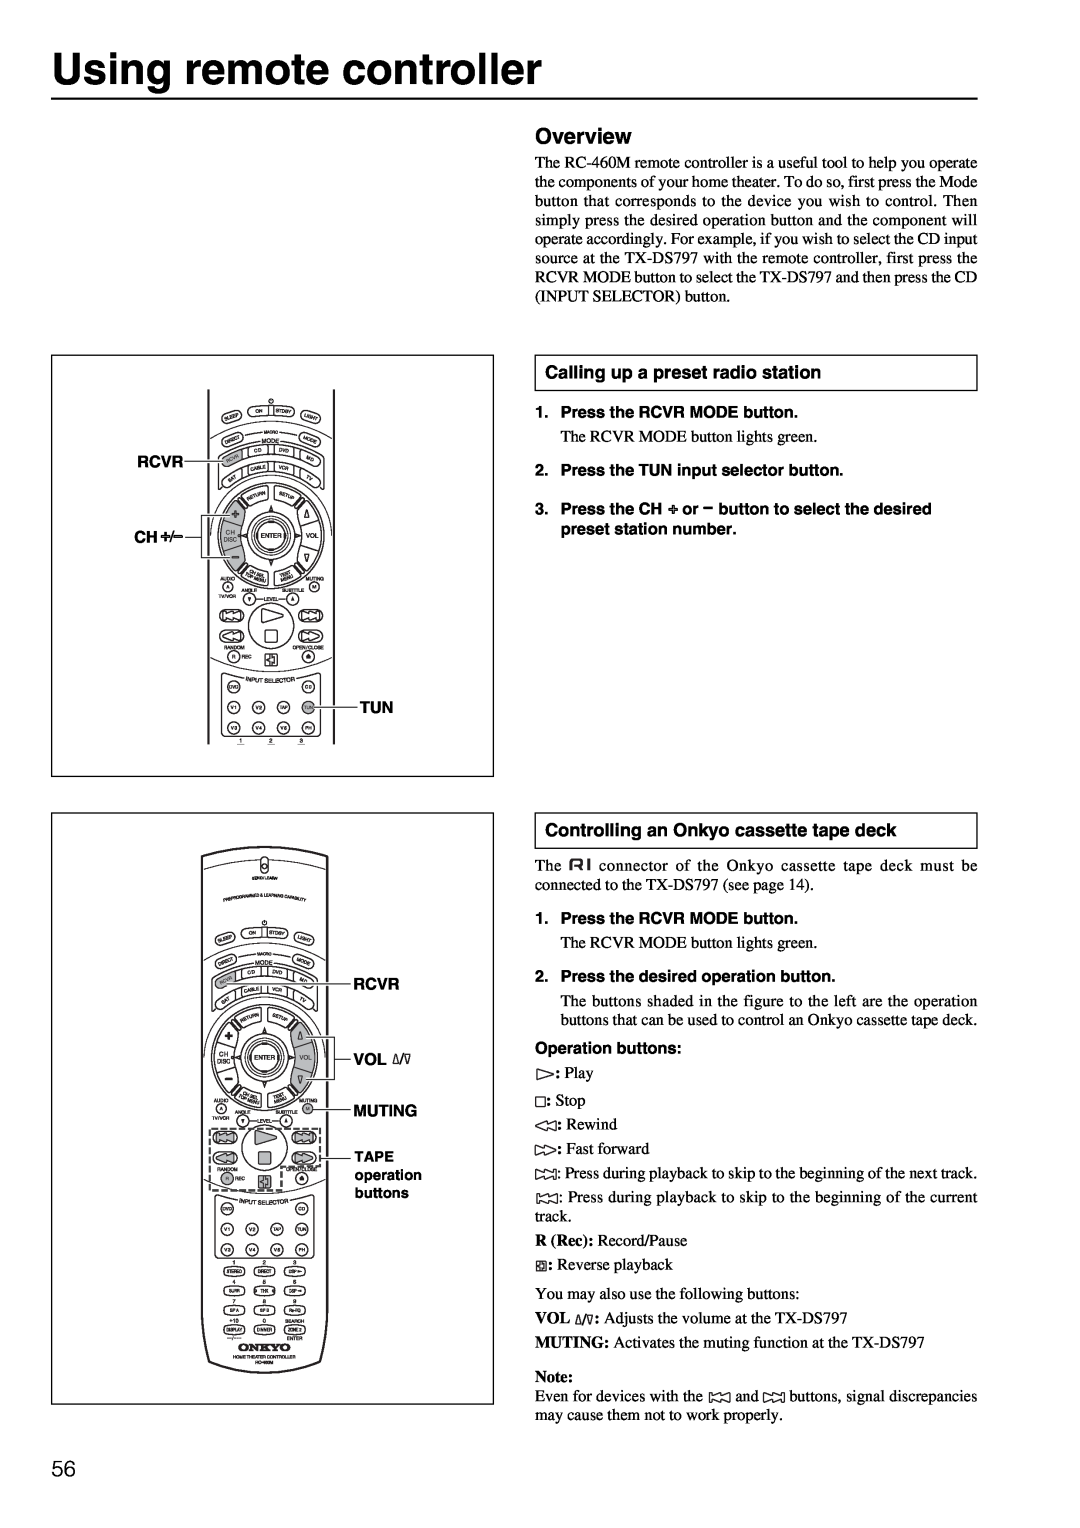 Onkyo TX-DS797 instruction manual Using remote controller, Overview, Calling up a preset radio station 